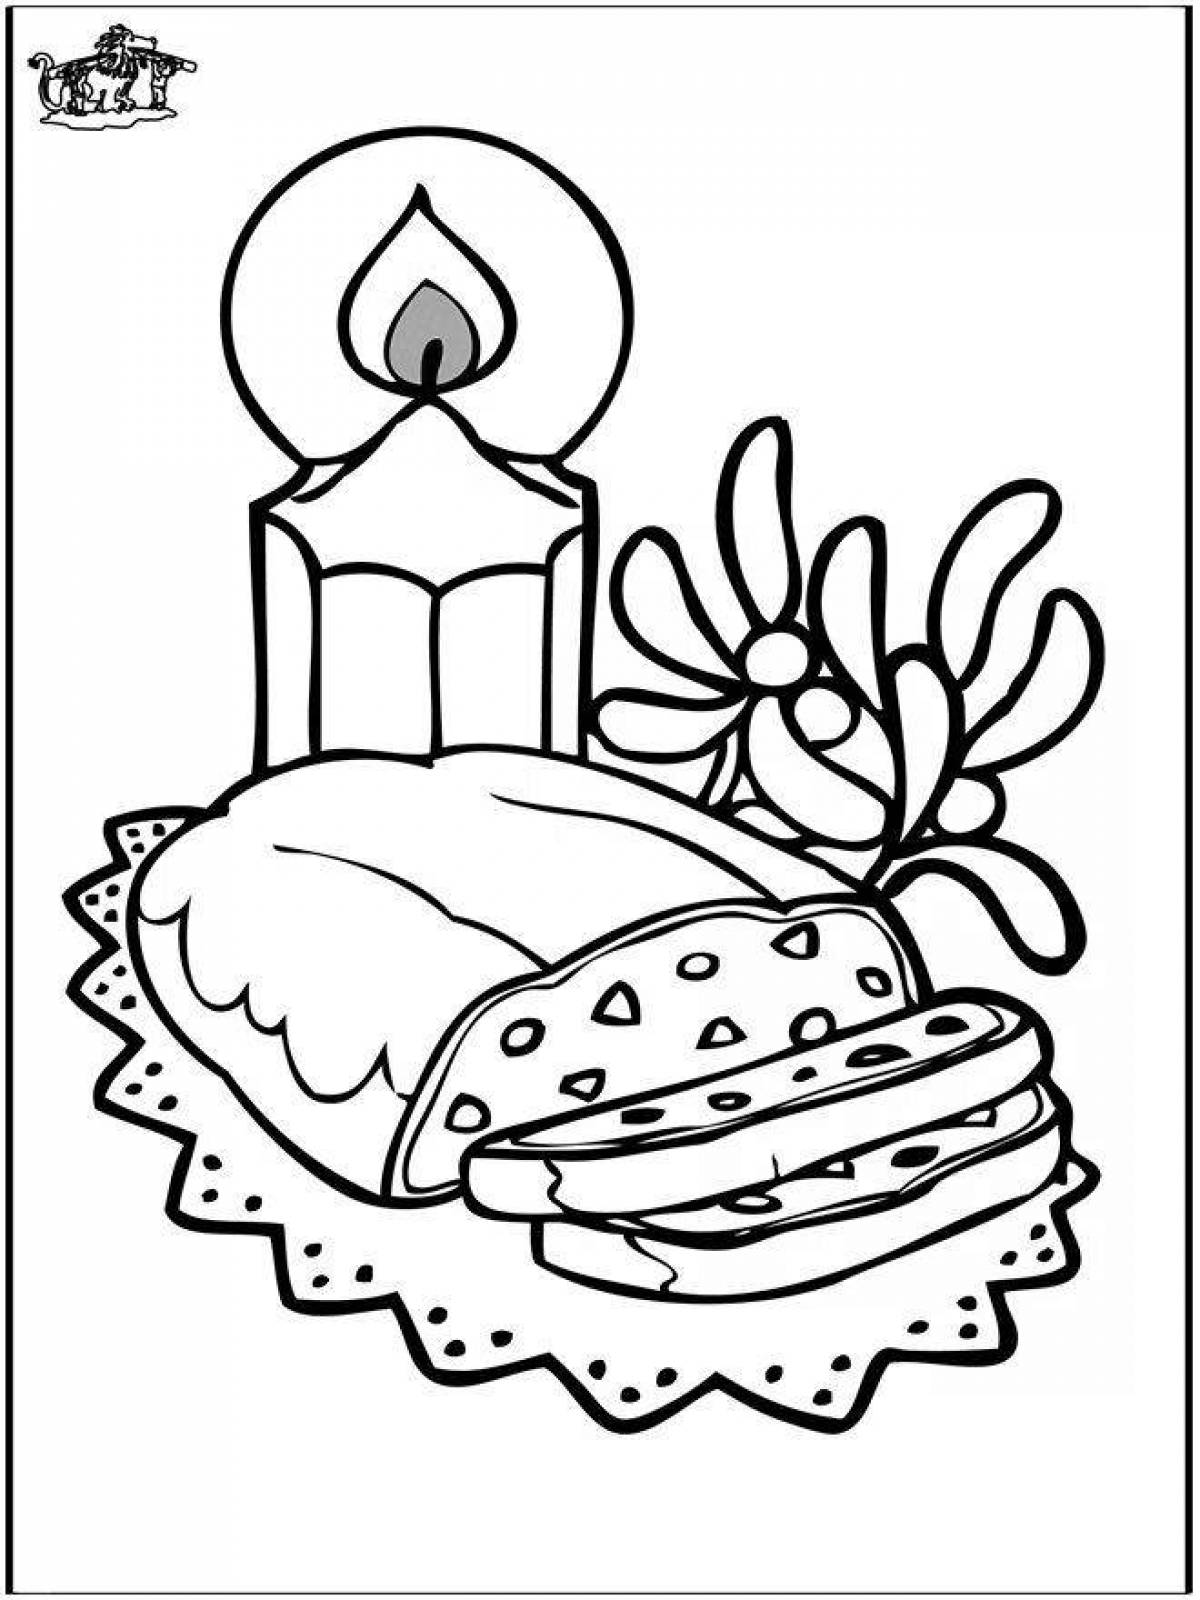 Color-brilliant loaf coloring page